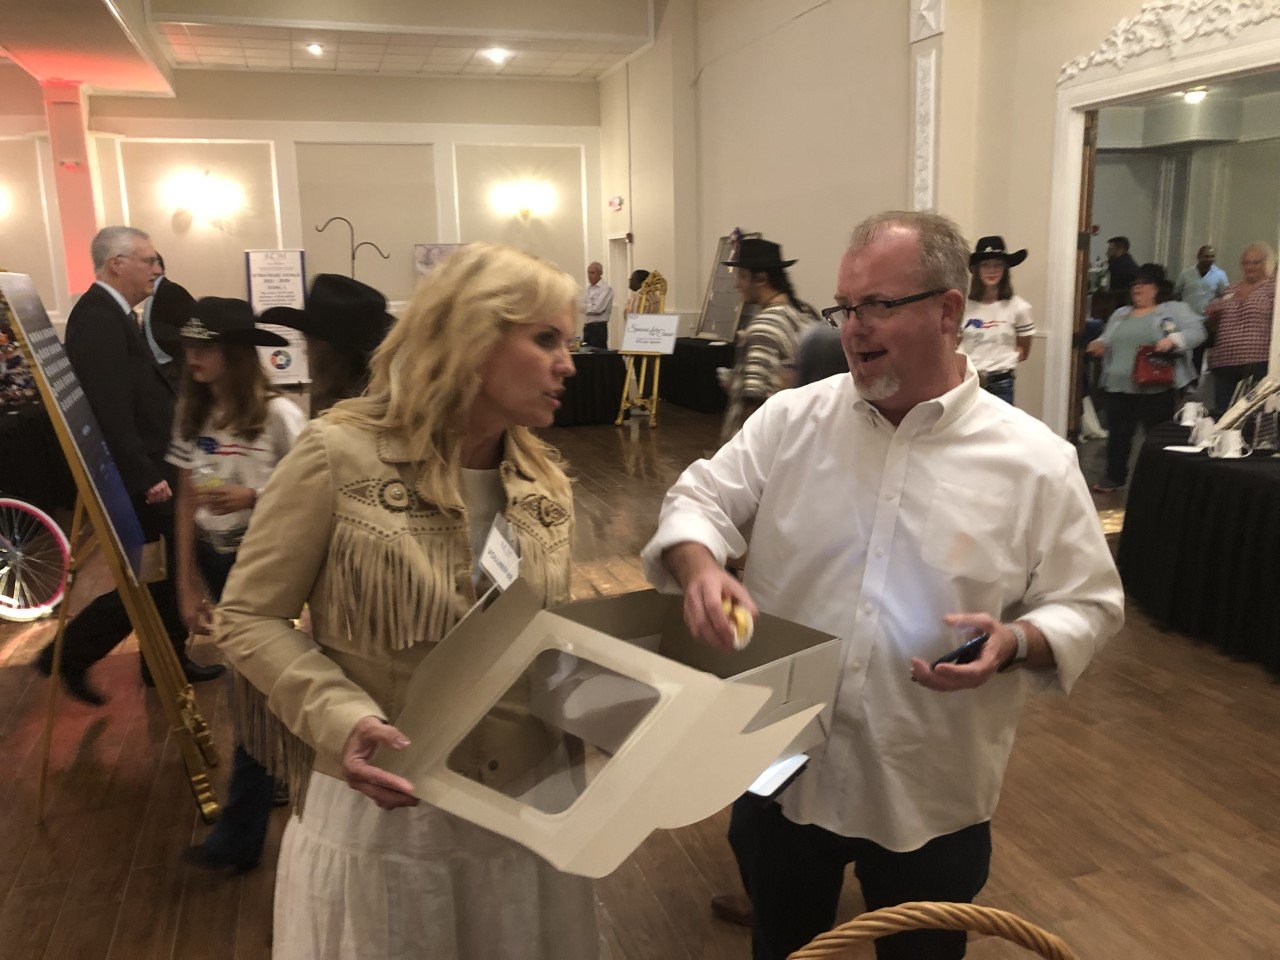 MaryBeth Ifft, of Grace Fellowship, offers Terry McGuire, of Sabbath Parkway Fellowship, some Bundt cake at Thursday’s Katy Christian Ministries Transforming Lives Gala. The gala is KCM’s largest fundraiser of the year and provides funding for its year-round operations and programs.